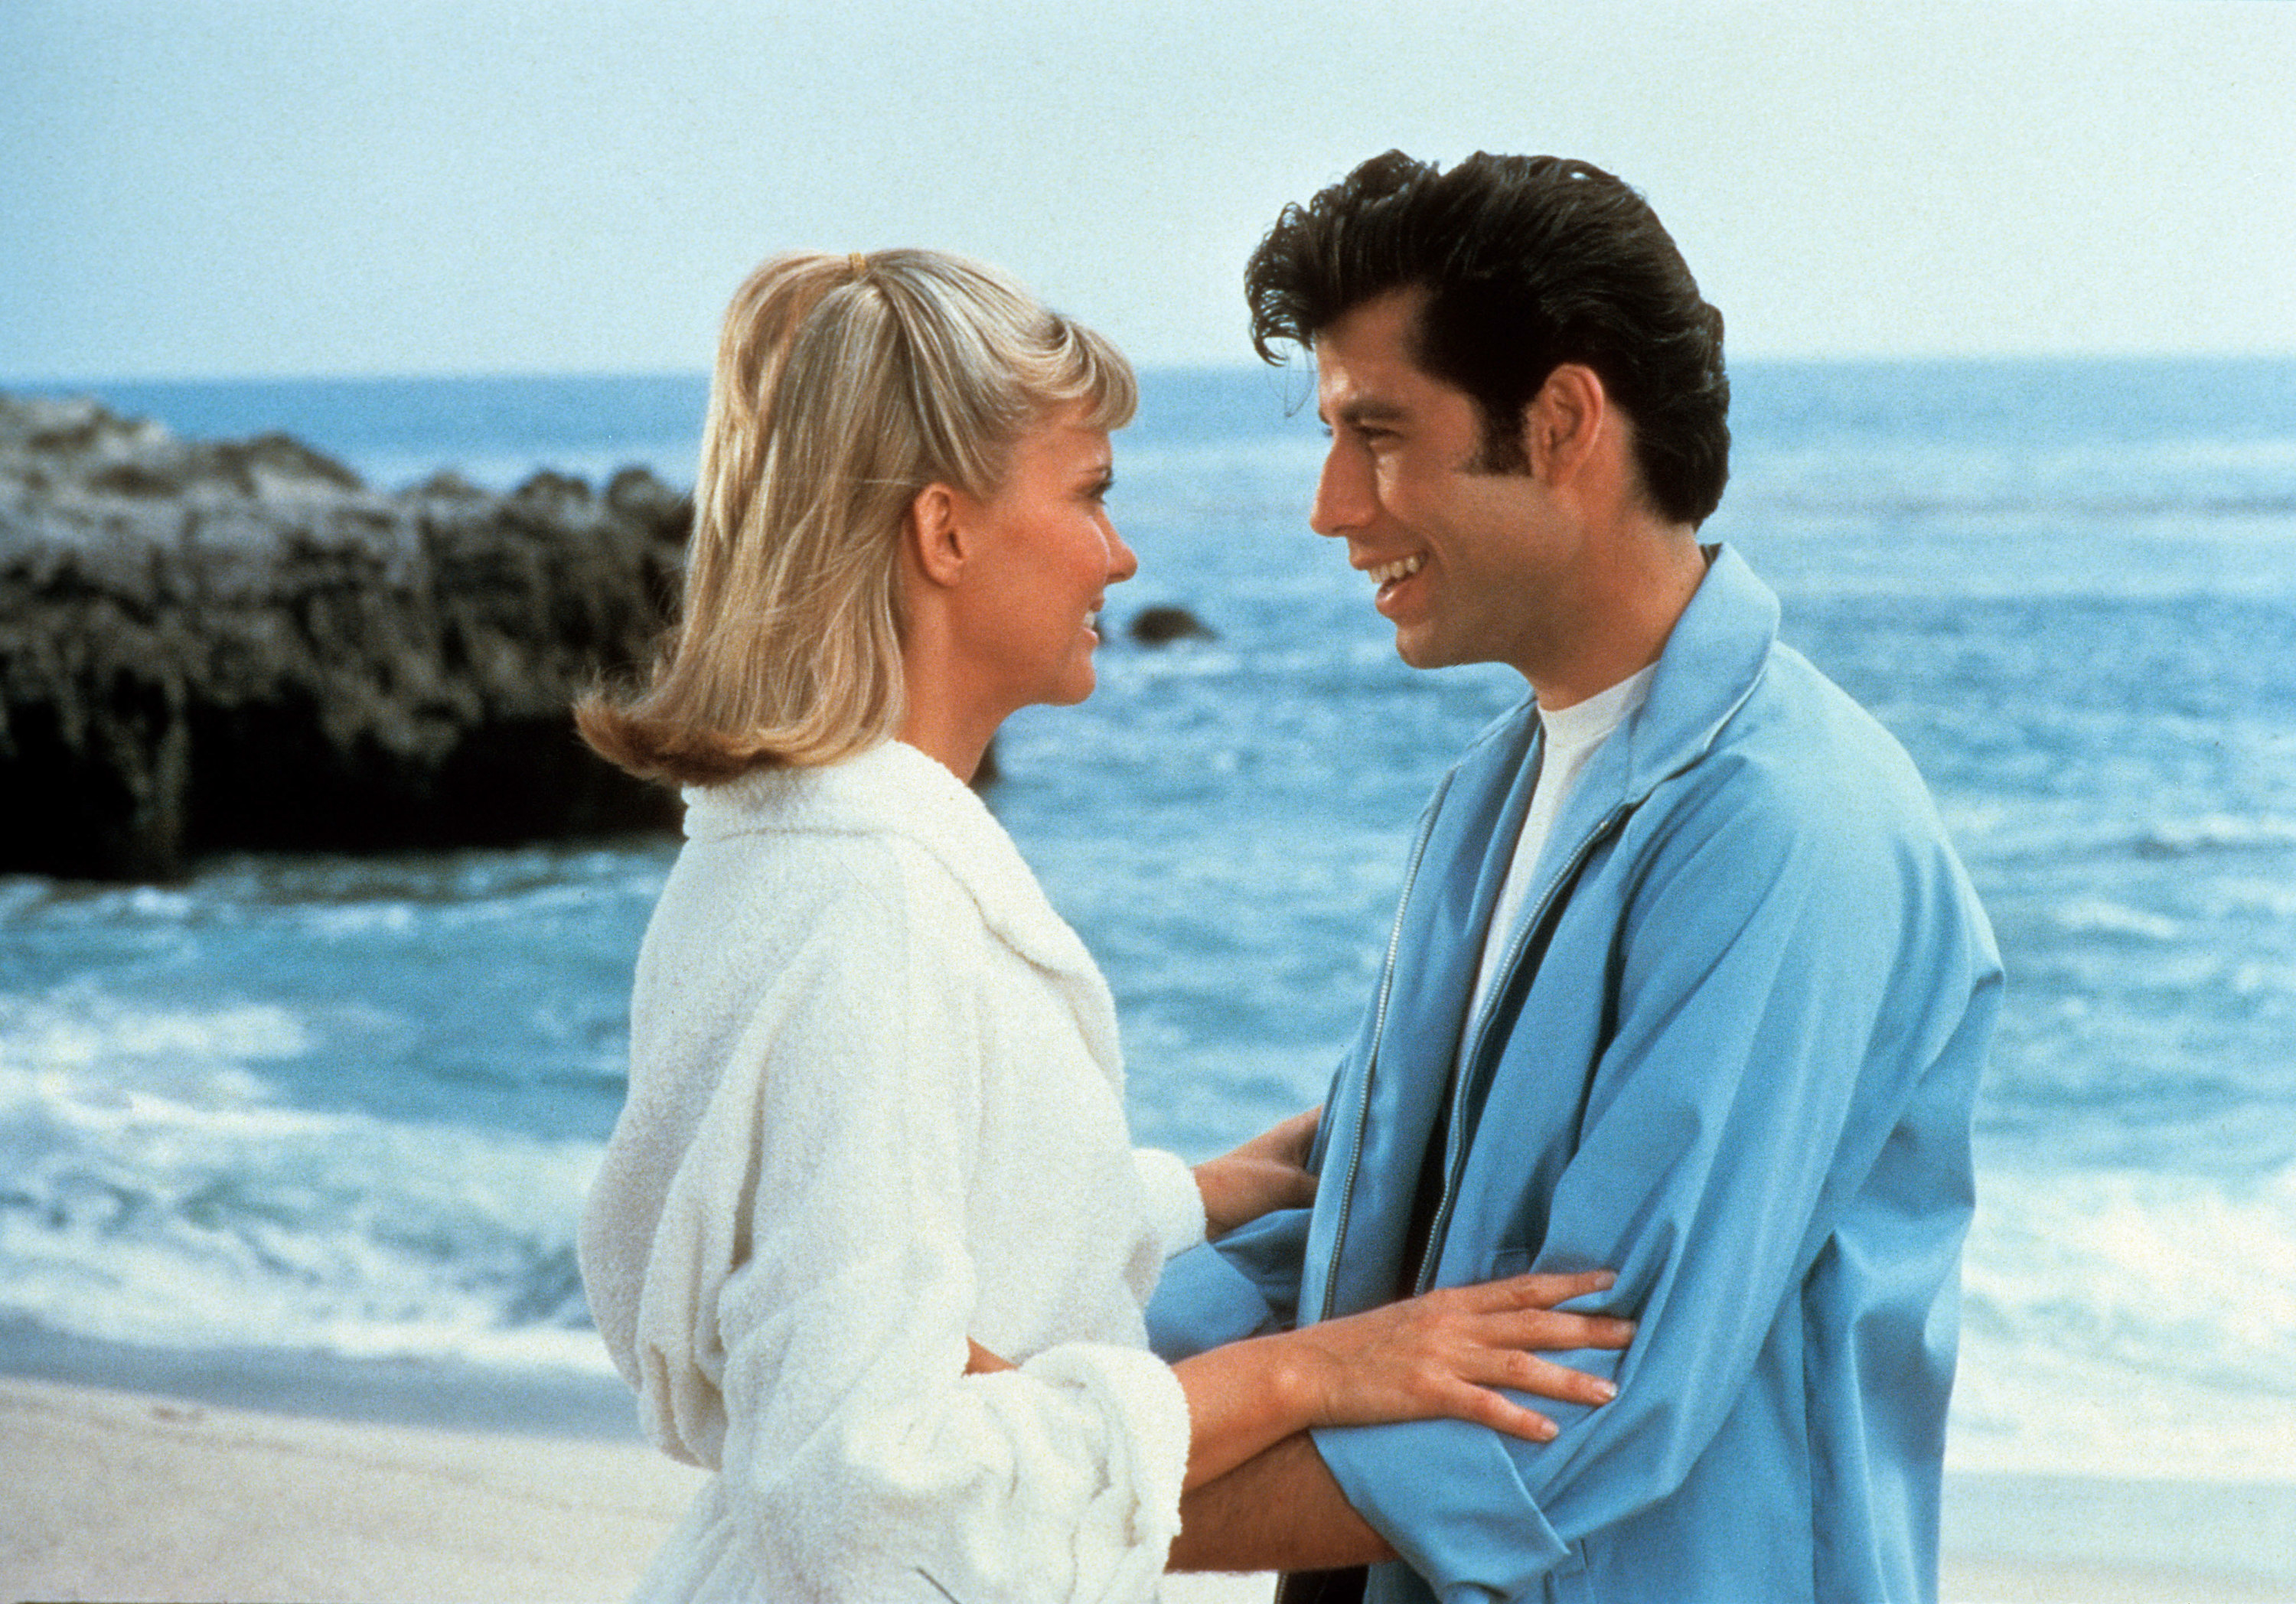 Olivia Newton-John and John Travolta in Grease standing by the ocean